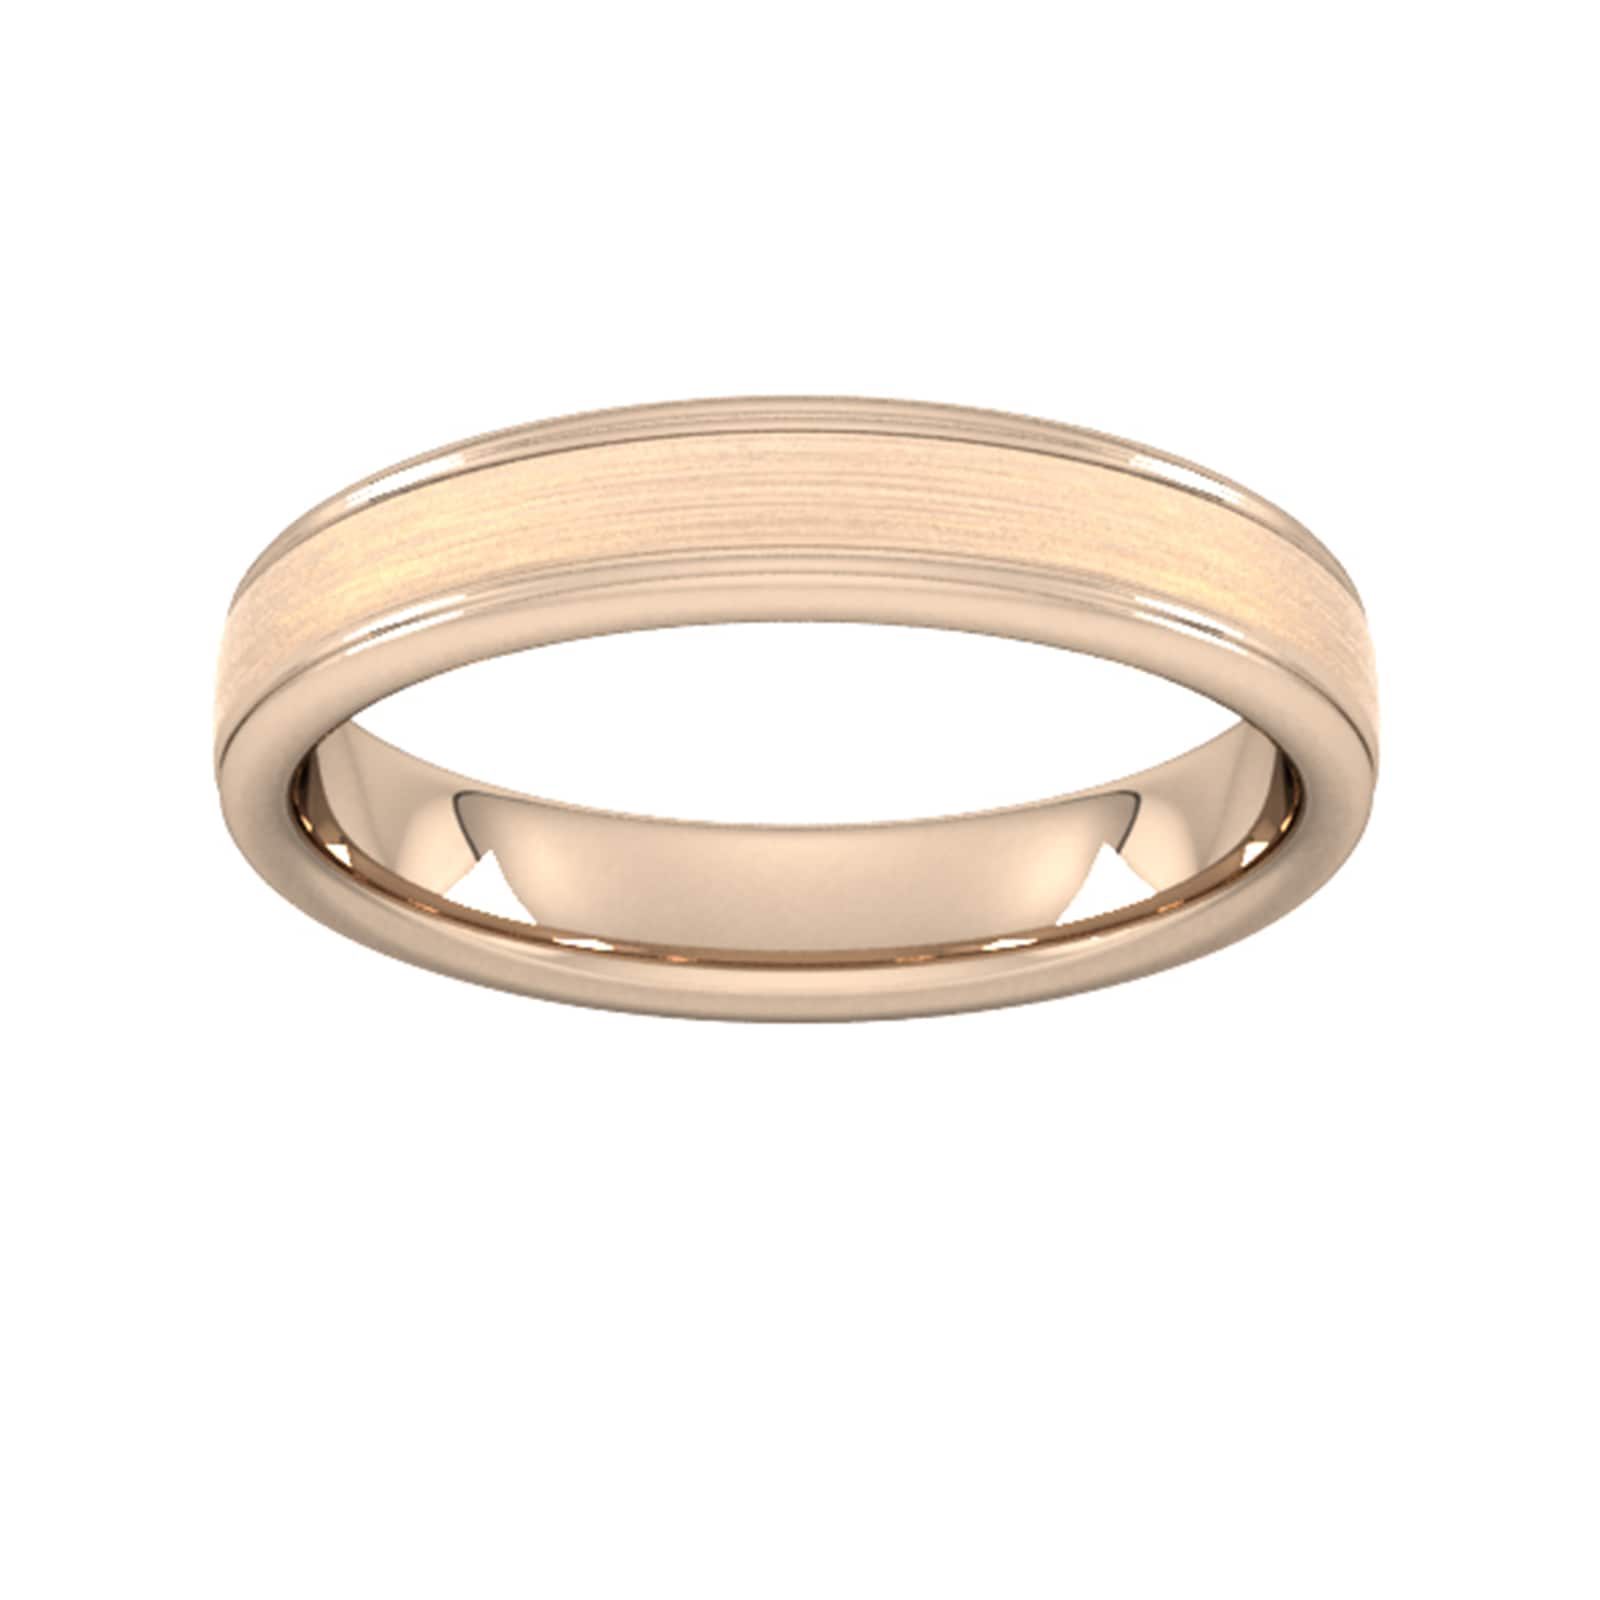 4mm D Shape Standard Matt Centre With Grooves Wedding Ring In 18 Carat Rose Gold - Ring Size Z